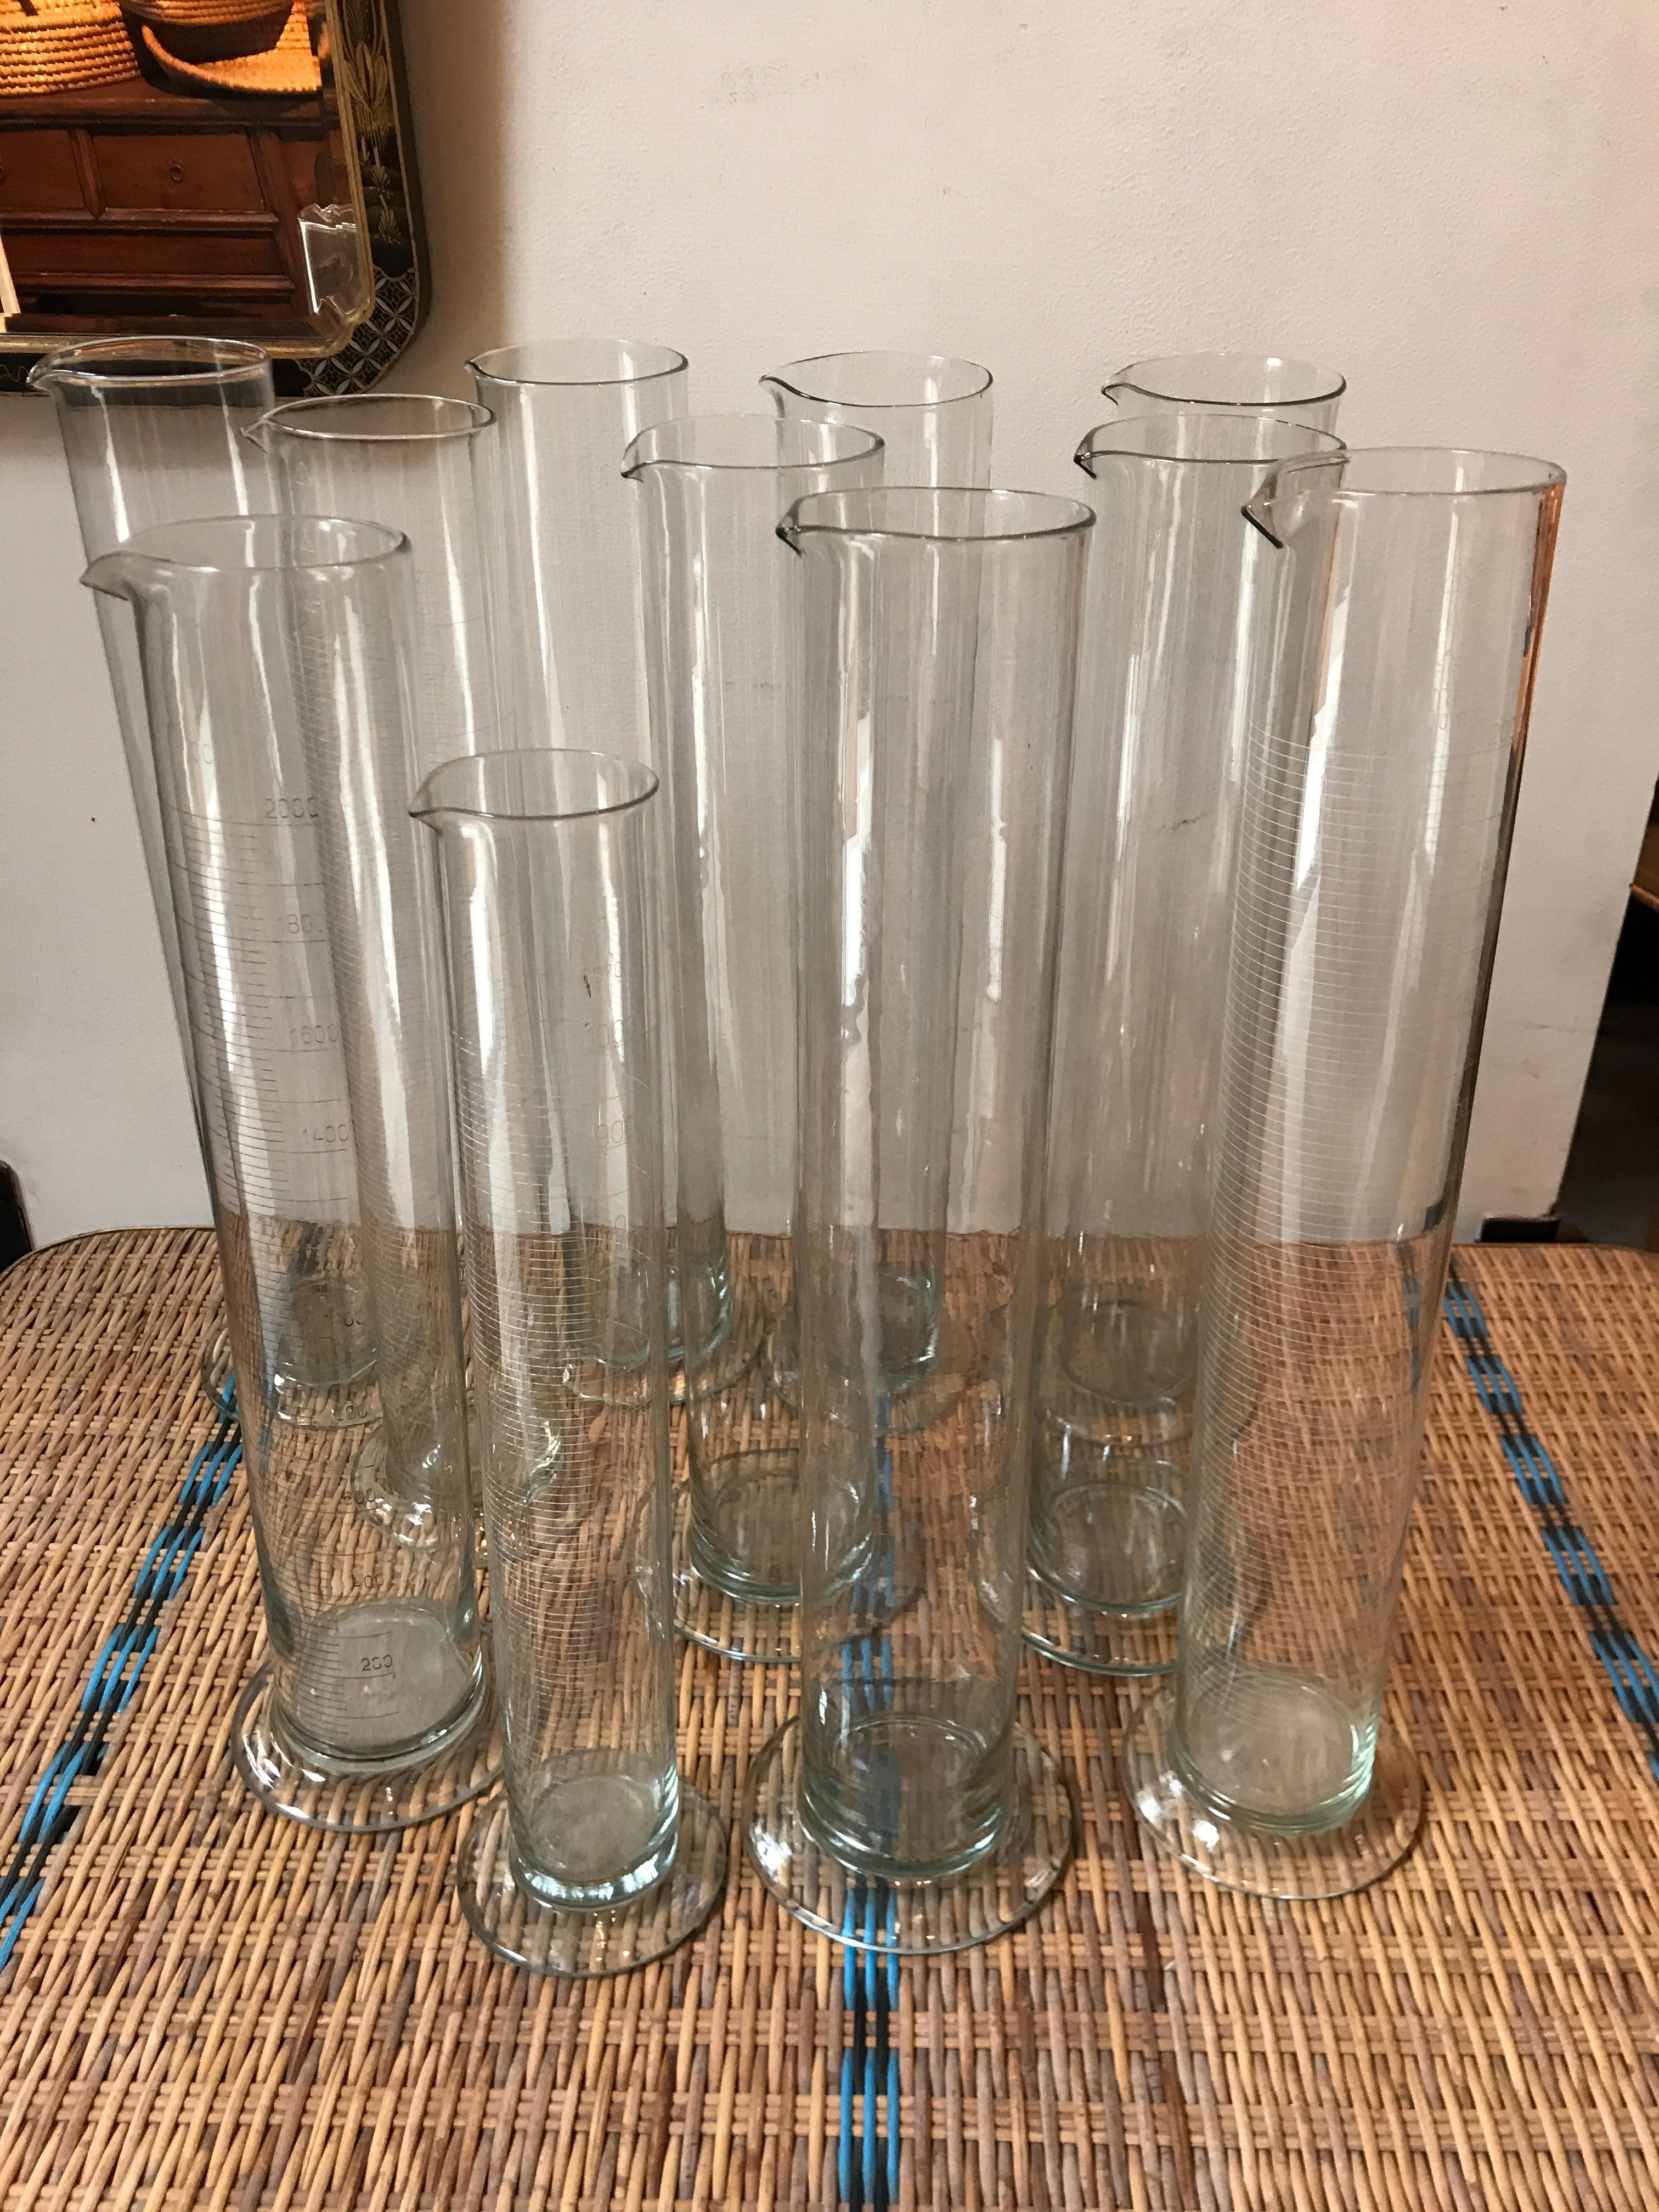 Belgian hand blown glass chemistry beakers are in excellent condition and ready to use as vases. The heavy glass foot makes the vessels very stabile in spite of the height. Use alone or in groups.
total of 11 available=
7 clear
3 with marking